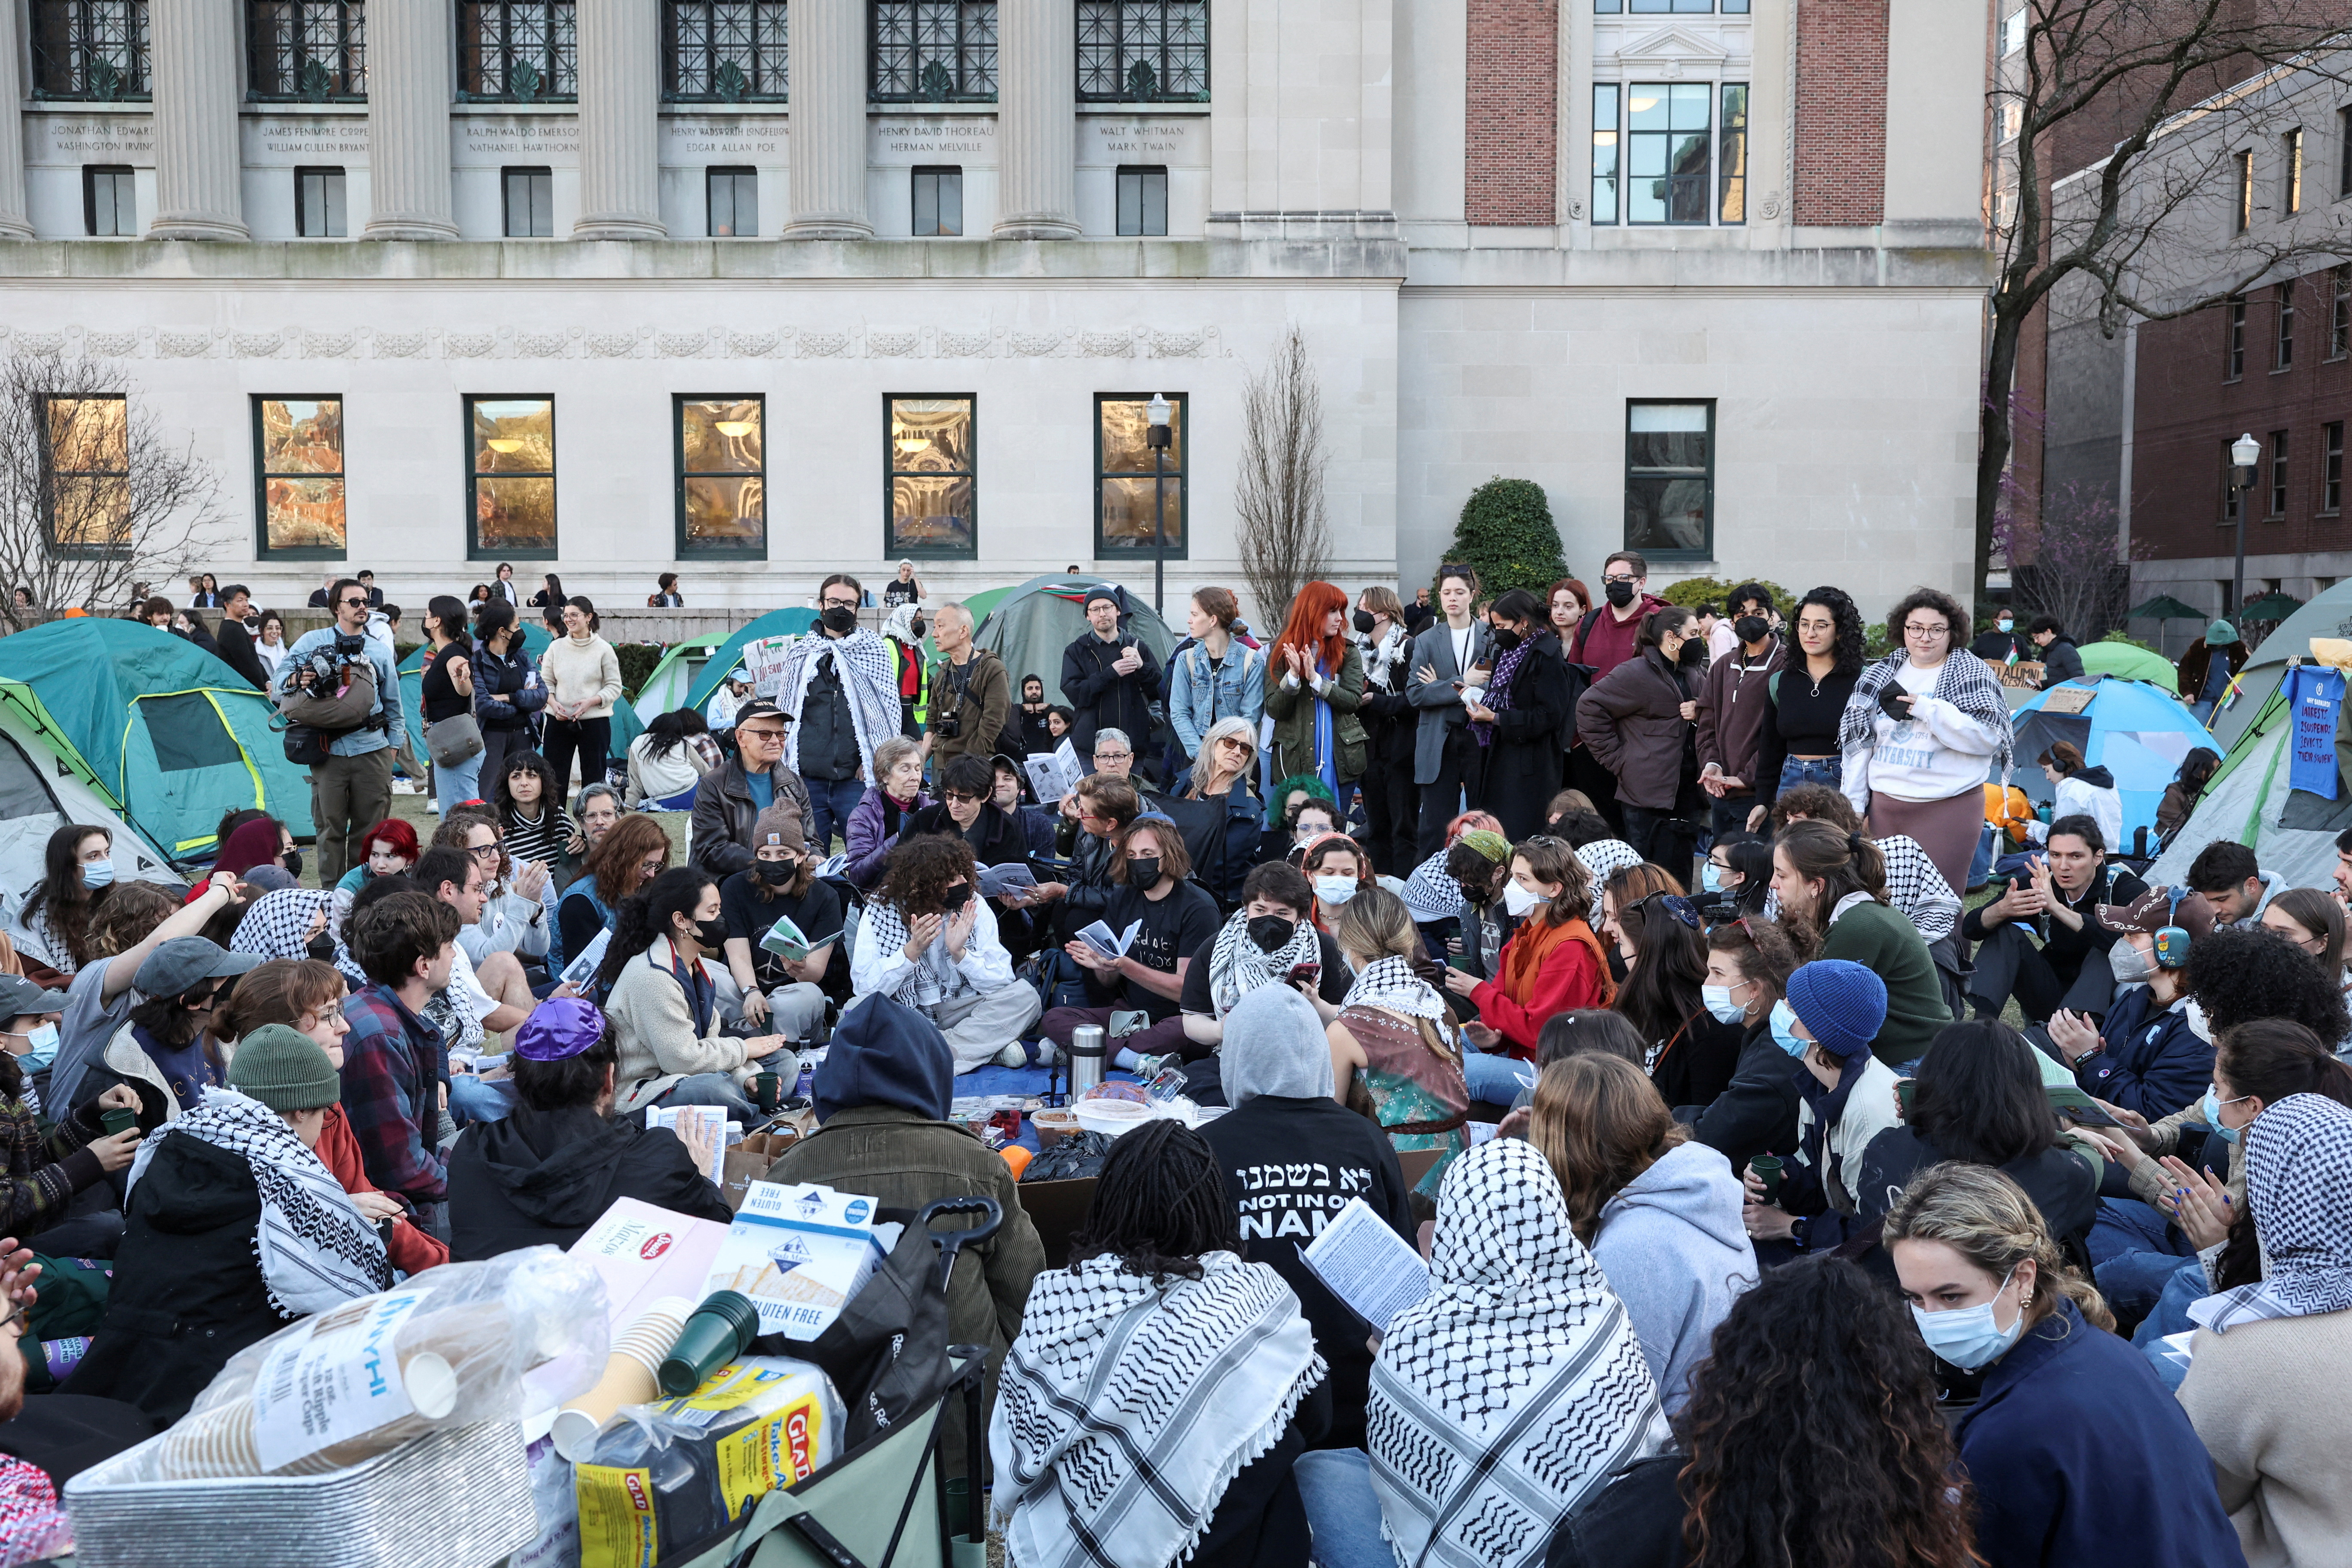 Protests continue at Columbia University in New York during the ongoing conflict between Israel and the Palestinian Islamist group Hamas